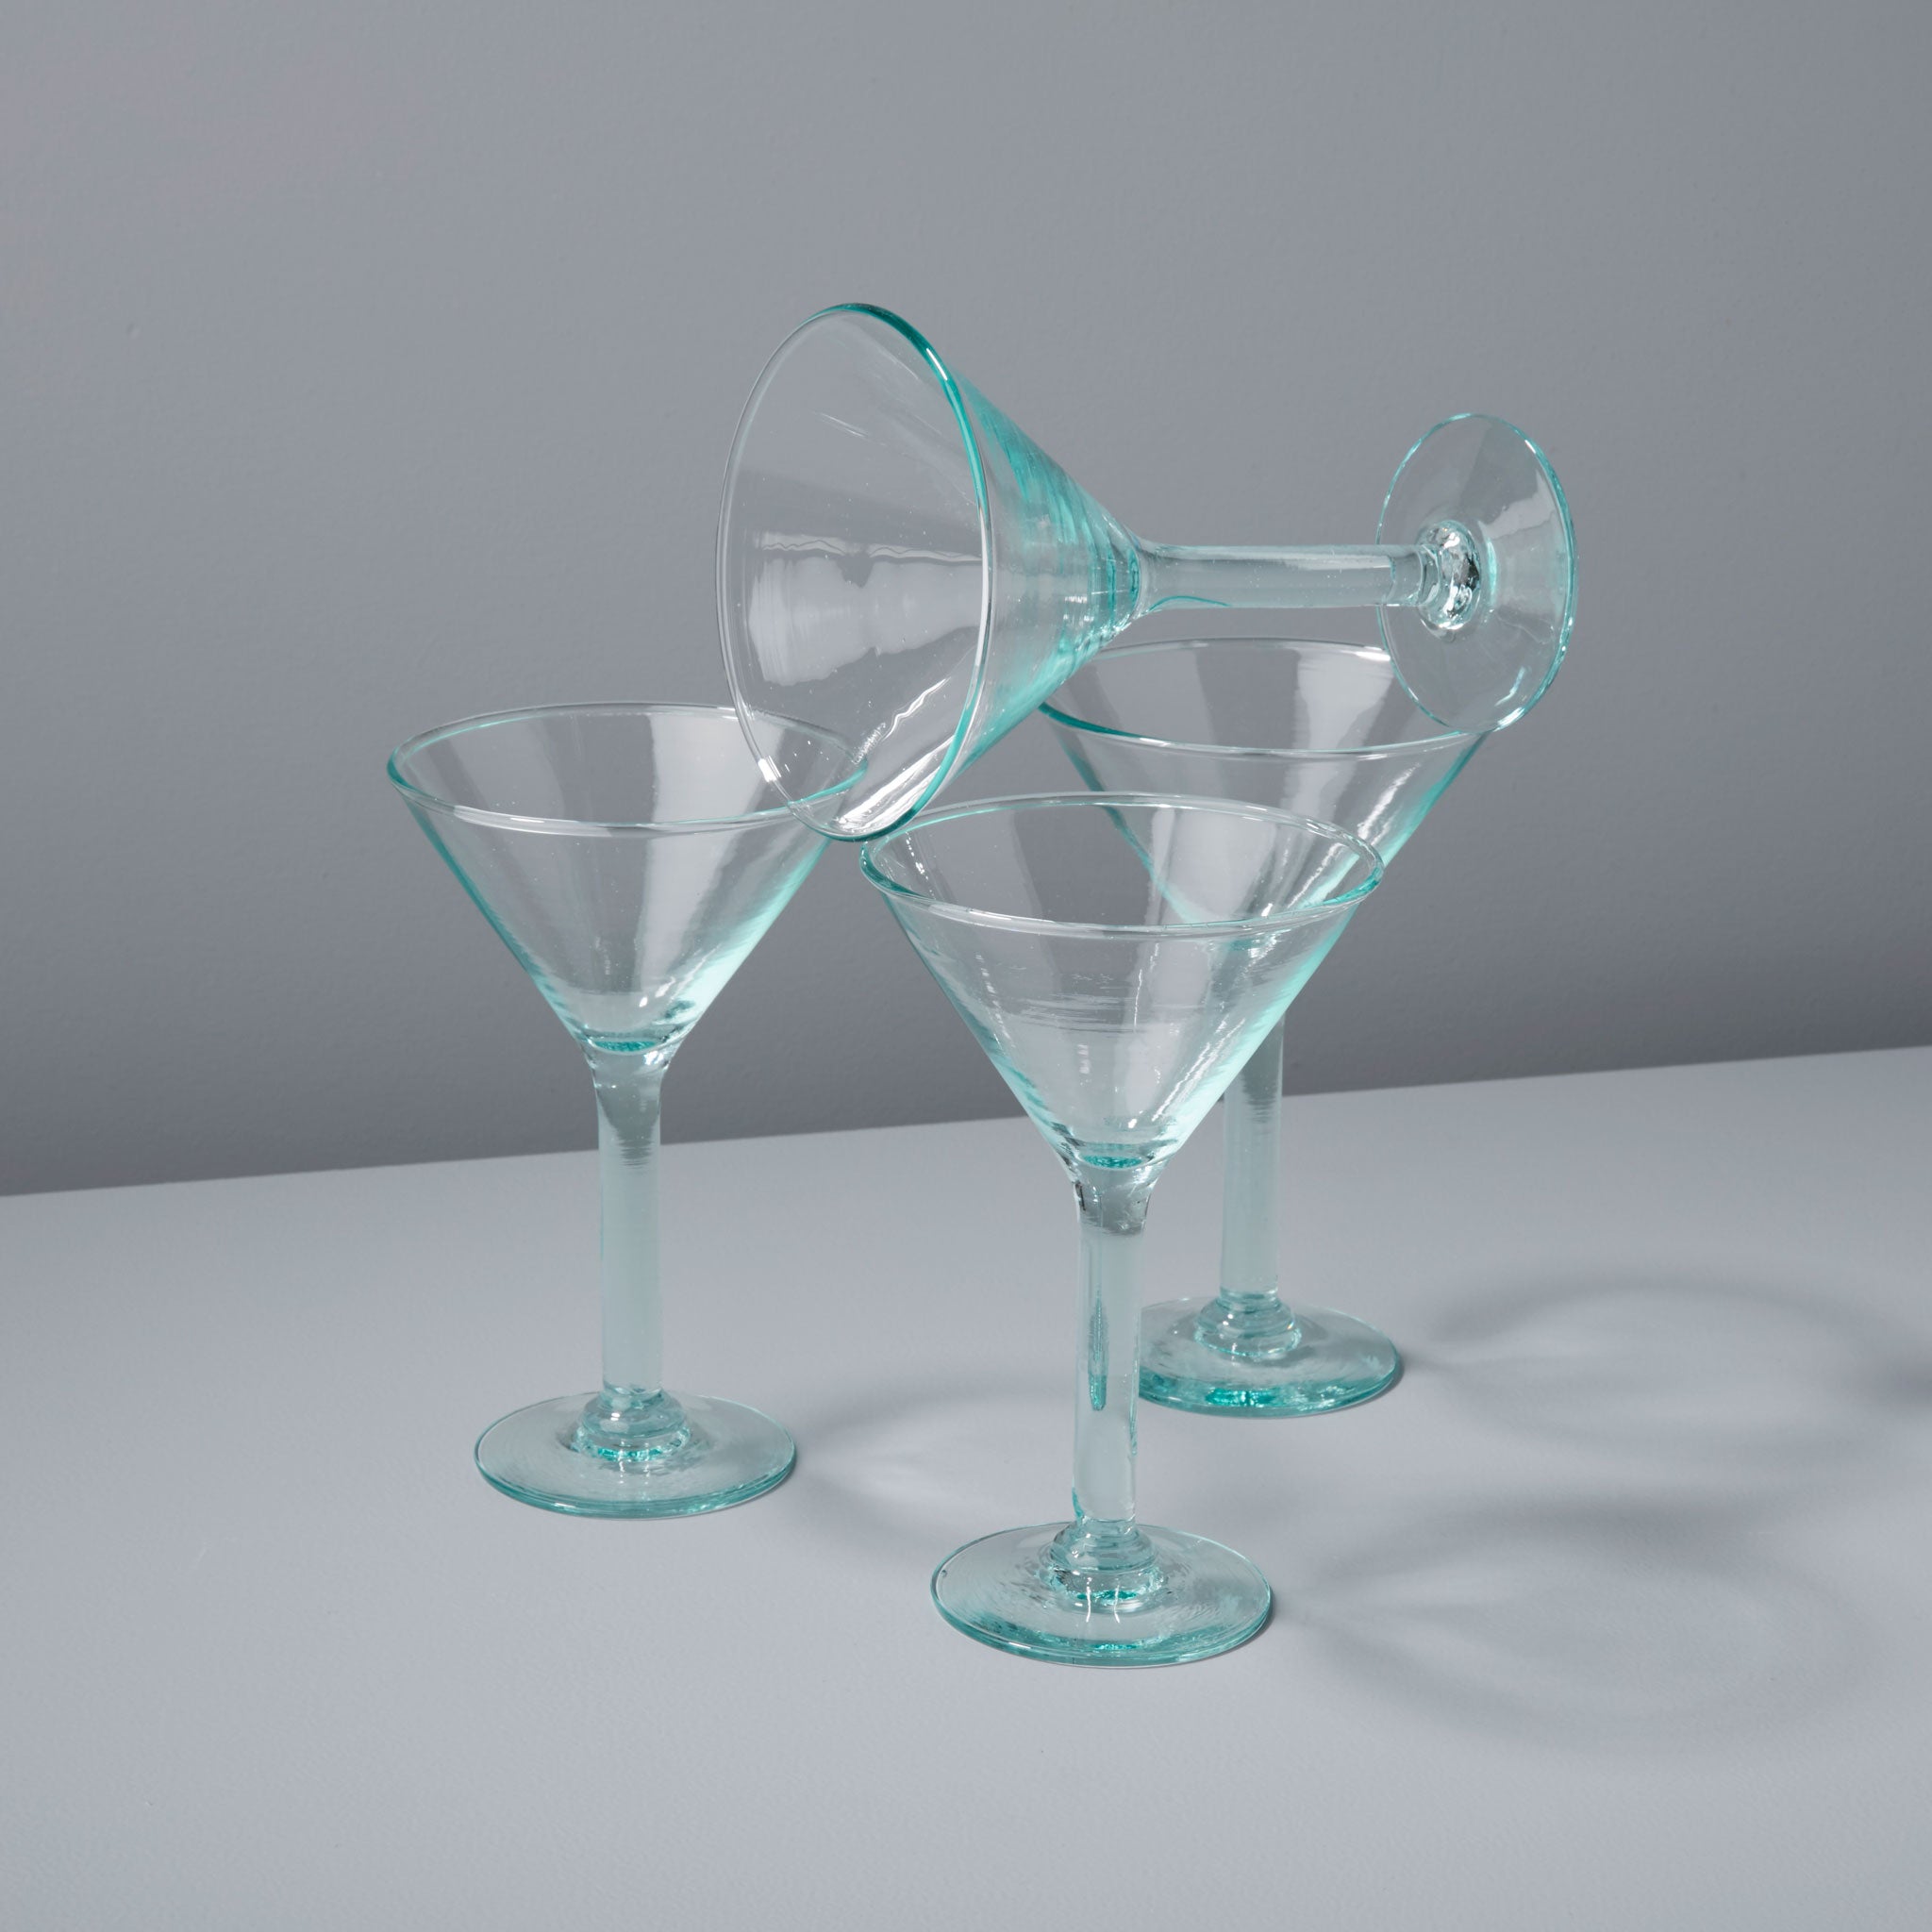 https://behome.com/cdn/shop/products/Be-Home_Recycled-Martini-Glass_46-44_62699c73-7e7b-4d98-aaa6-c60cd5152a3a.jpg?v=1675213117&width=3840